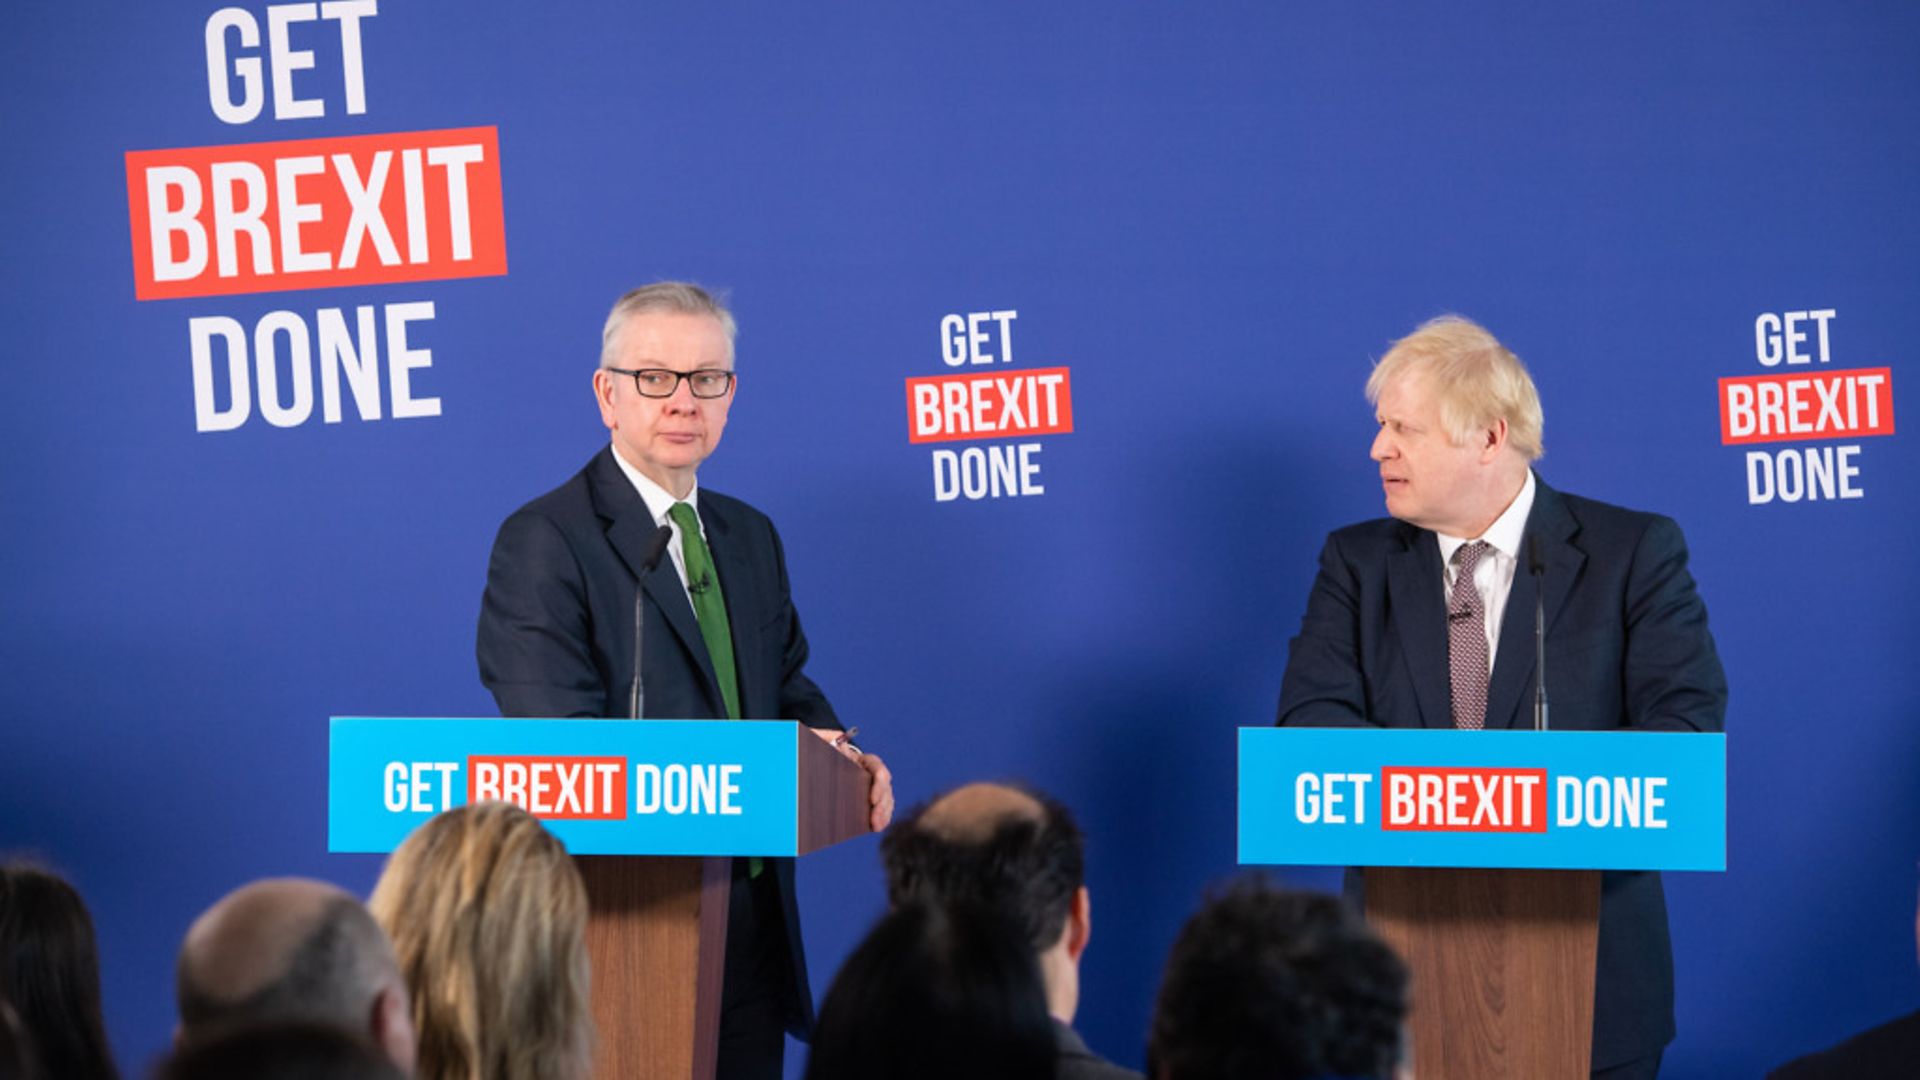 Prime Minister Boris Johnson and Chancellor of the Duchy of Lancaster, Michael Gove (left) speaking at a press conference in Millbank Tower. - Credit: PA